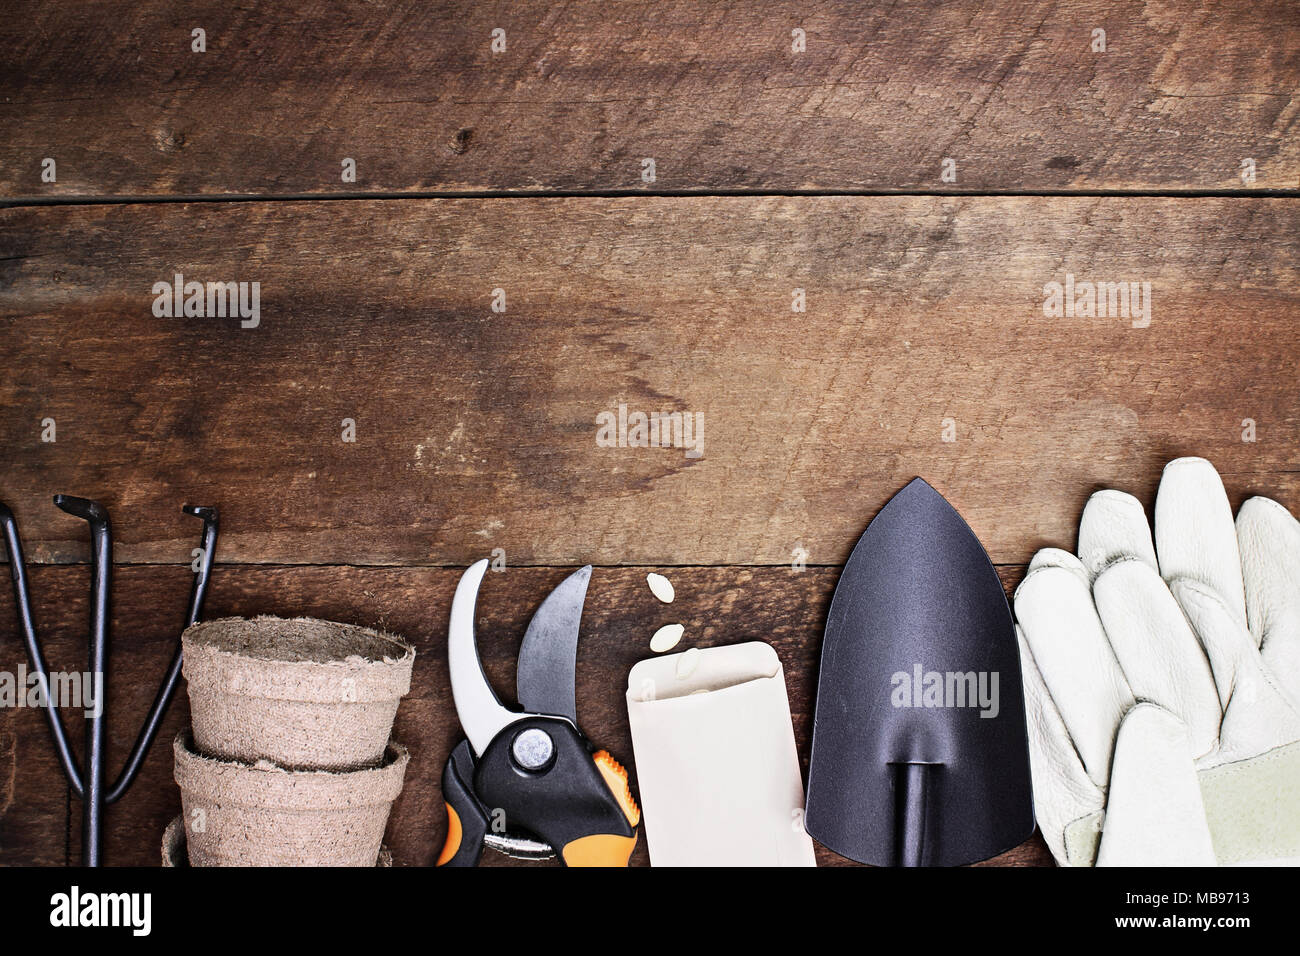 Background of various generic gardening tools, gloves and vegetable seeds shot from above over a rustic wood table in flat lay style. Stock Photo